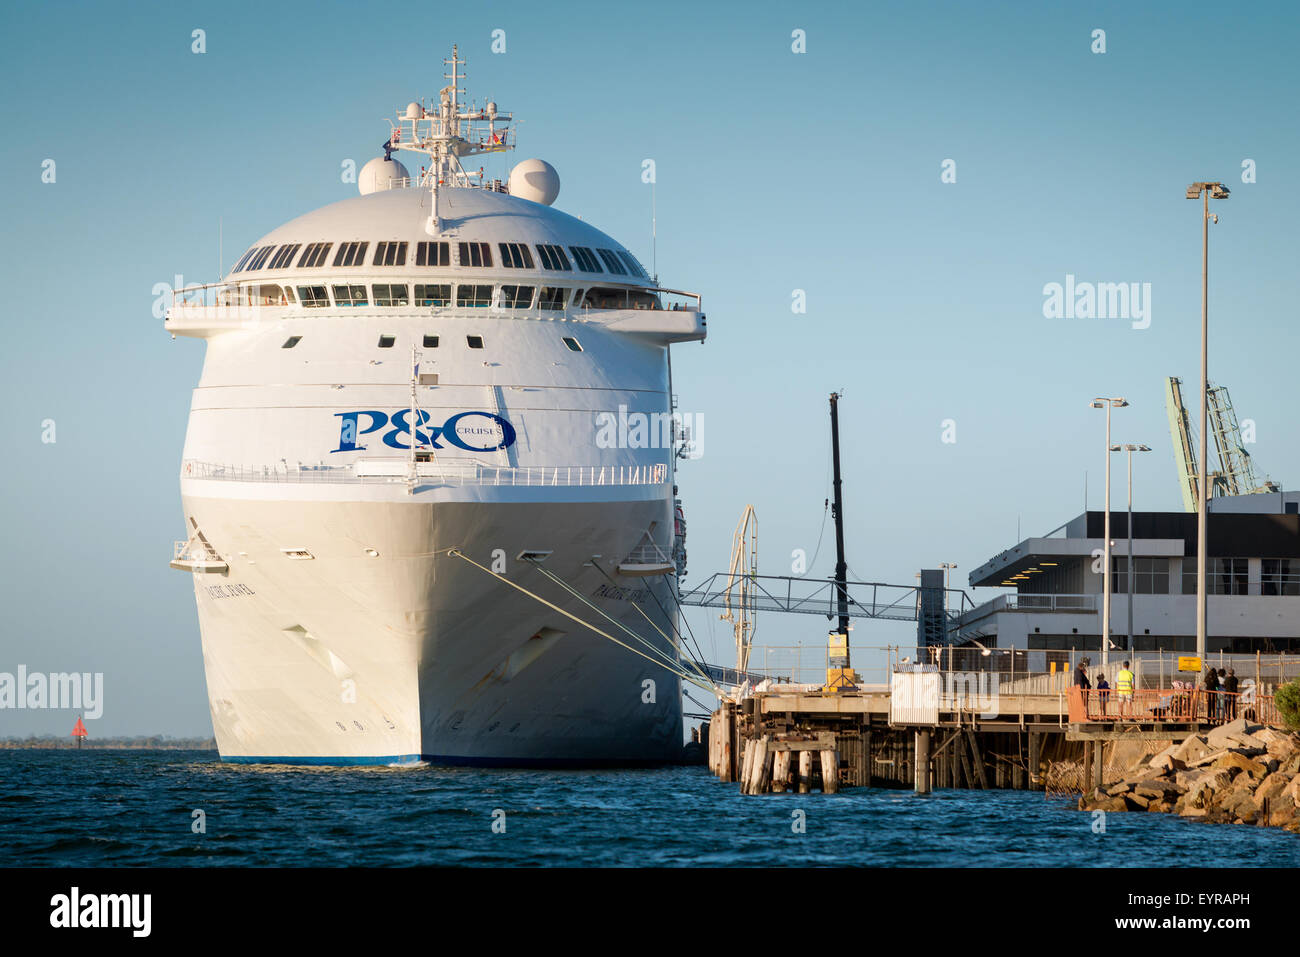 Adelaide, Australia - March 5, 2015: P&O Pacific Jewel cruise ship is docked at Port Adelaide to pick up passengers Stock Photo